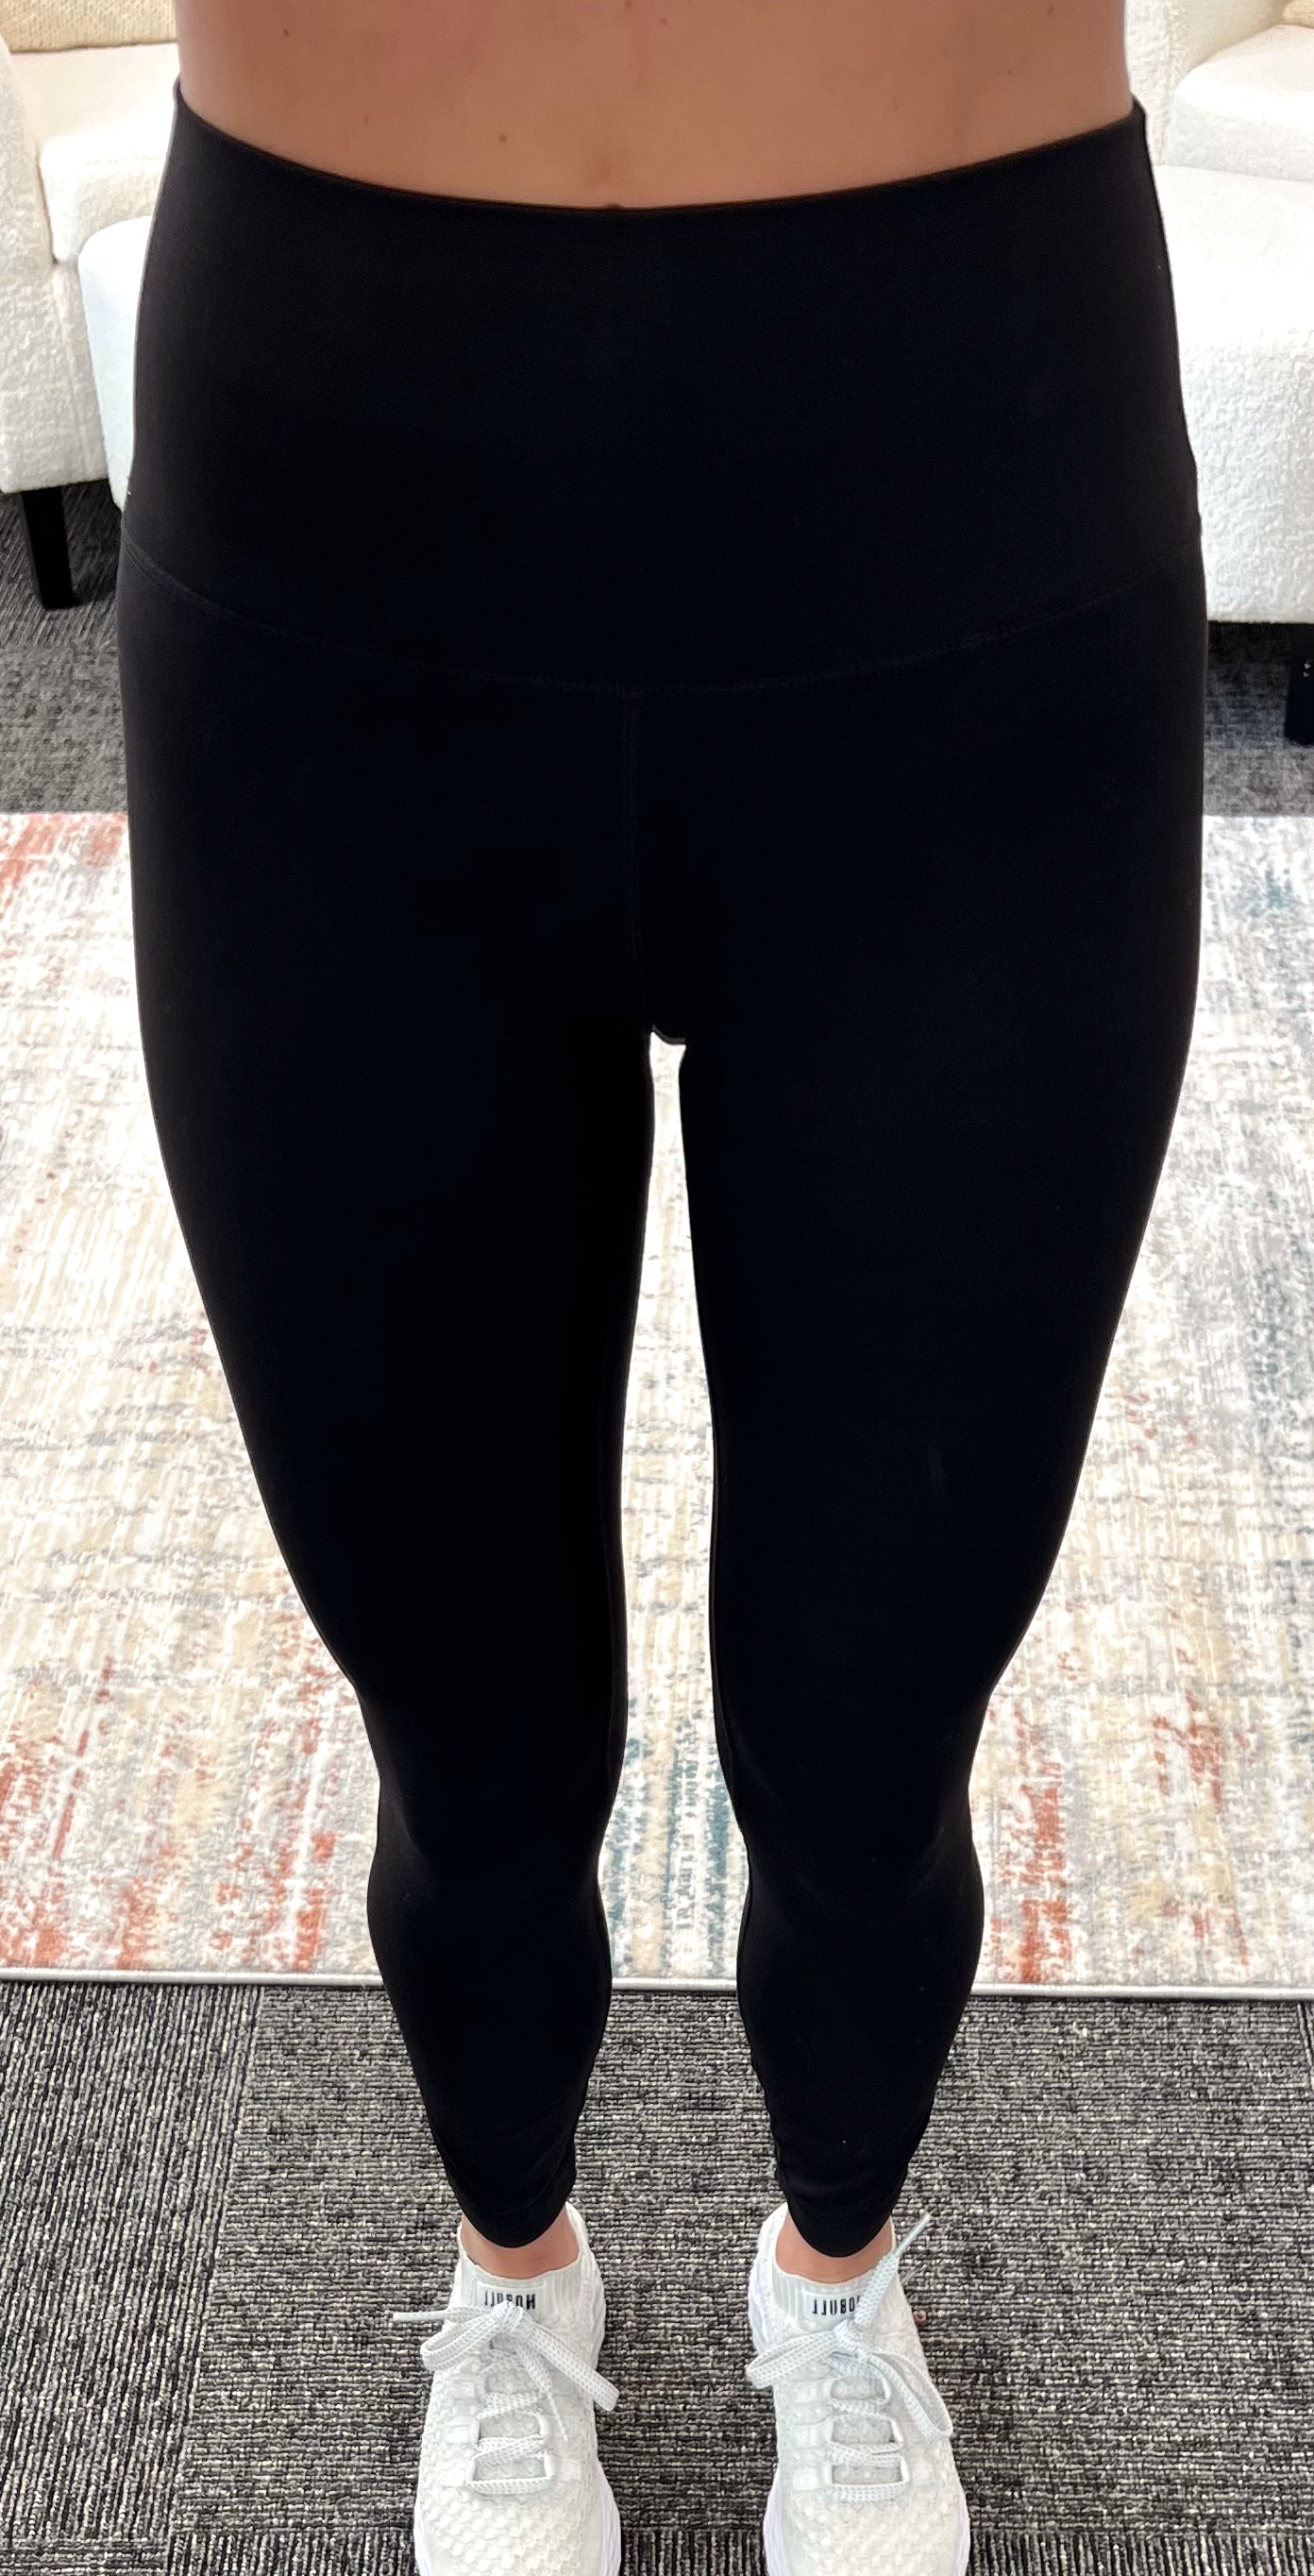 The Buttery Soft Leggings – Happy Soul Sisters